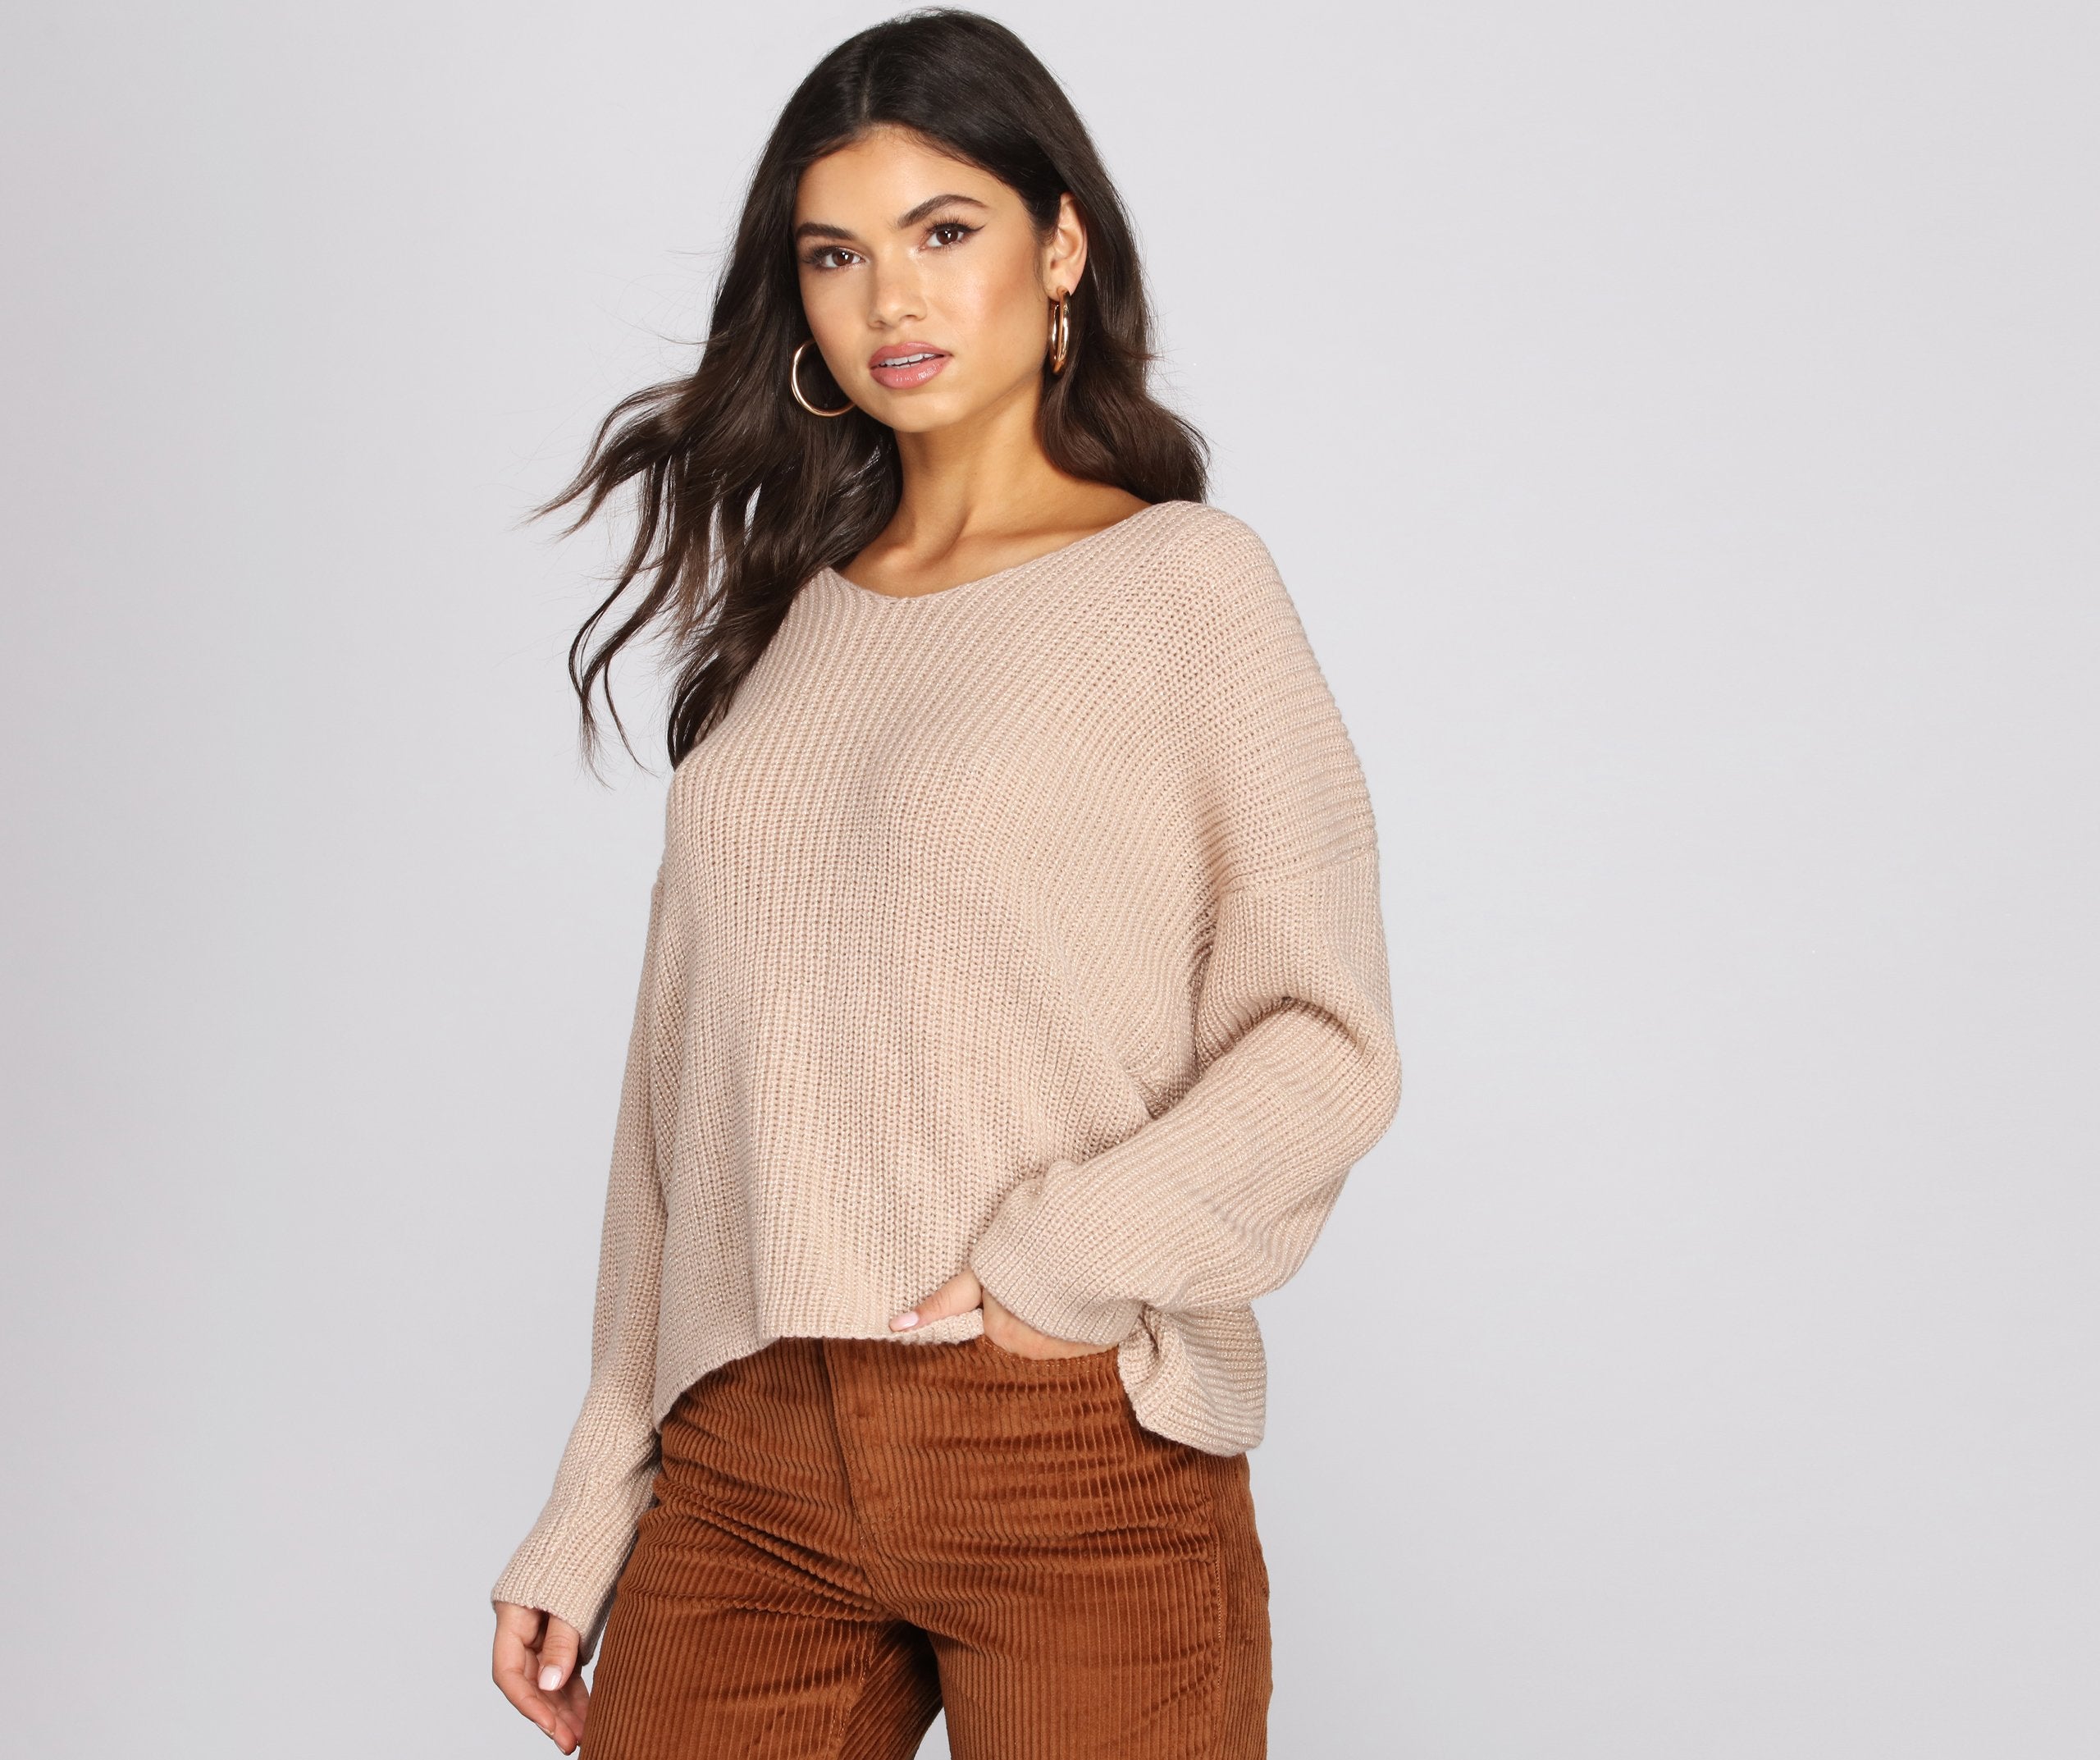 Knot So Innocent Knit Sweater - Lady Occasions